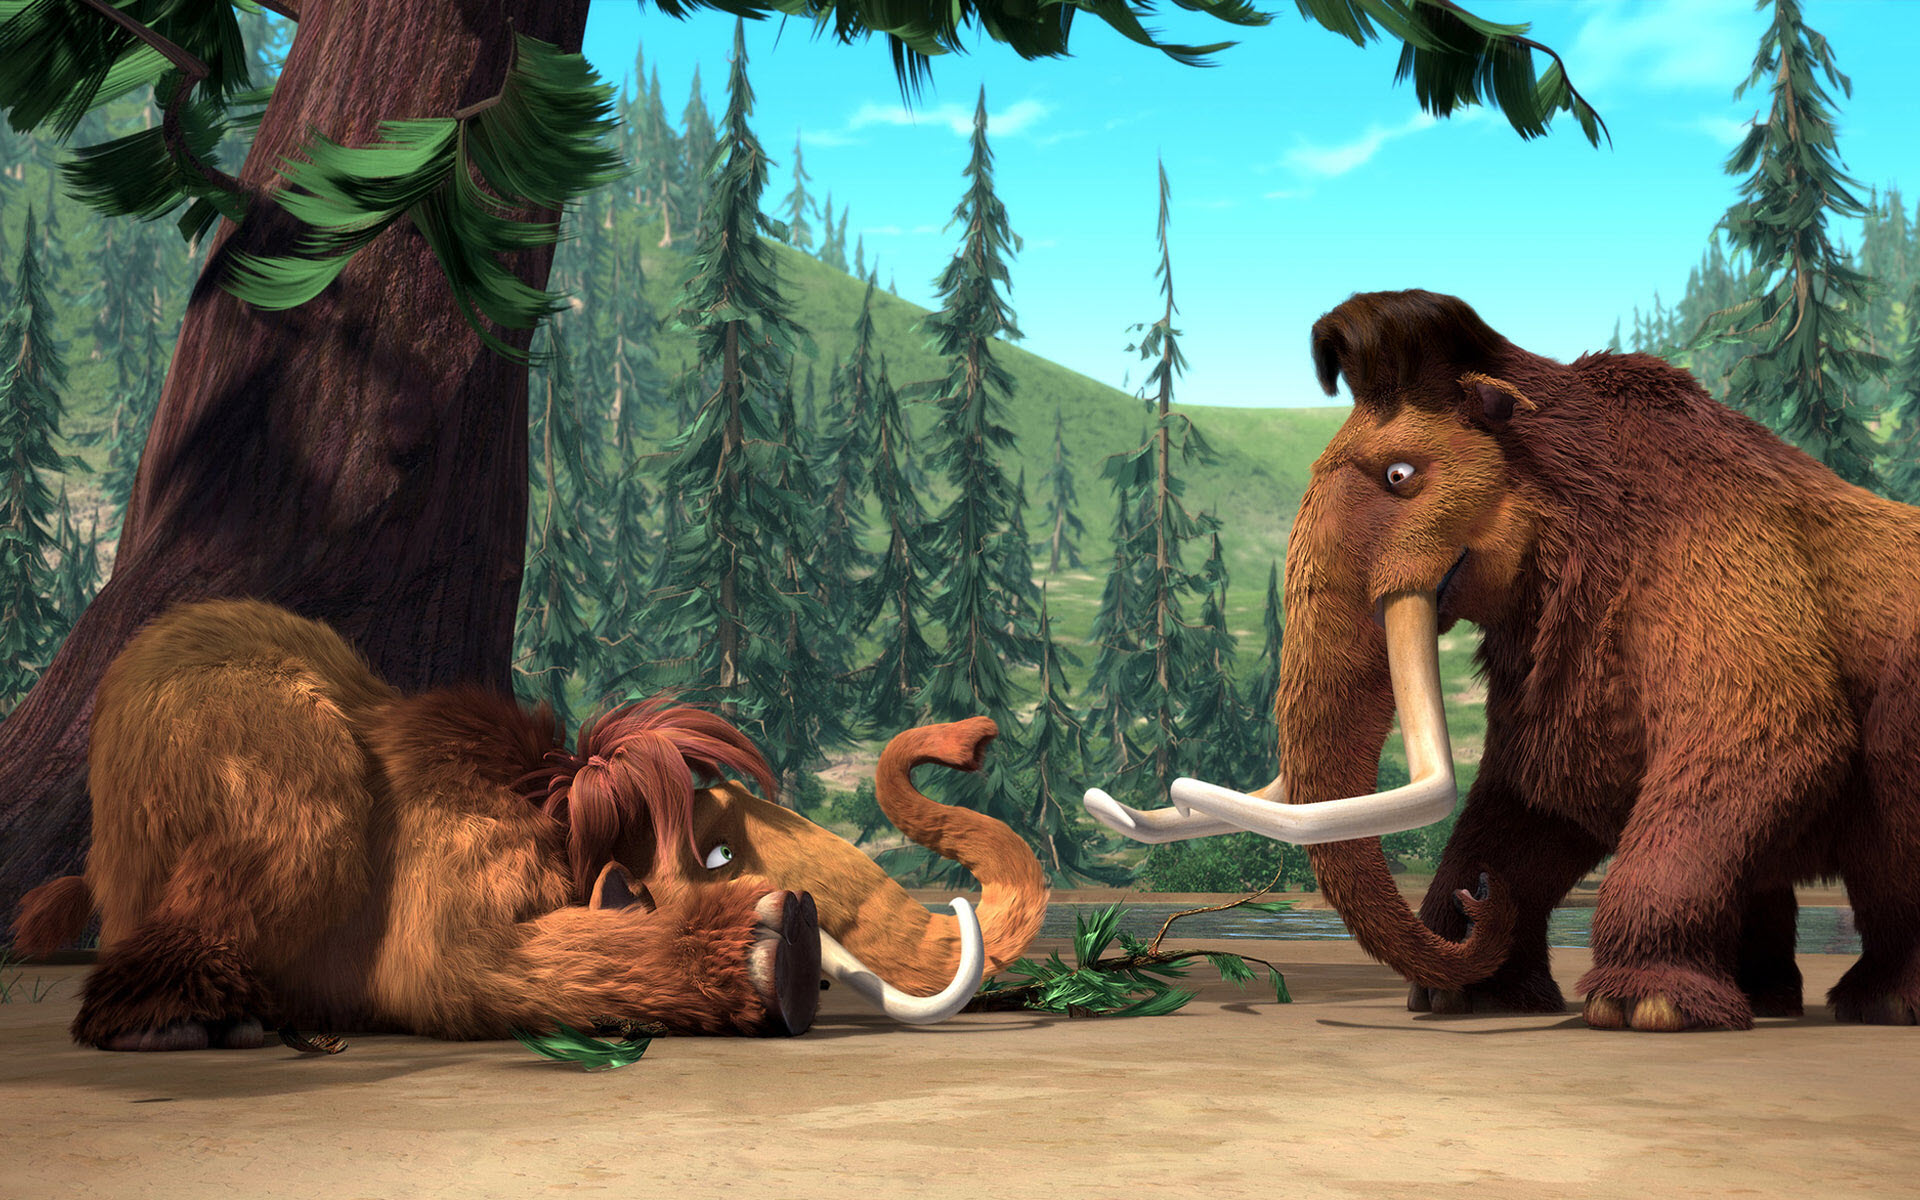 Manny And Ellie Ice Age Hd Wallpaper Images, Photos, Reviews